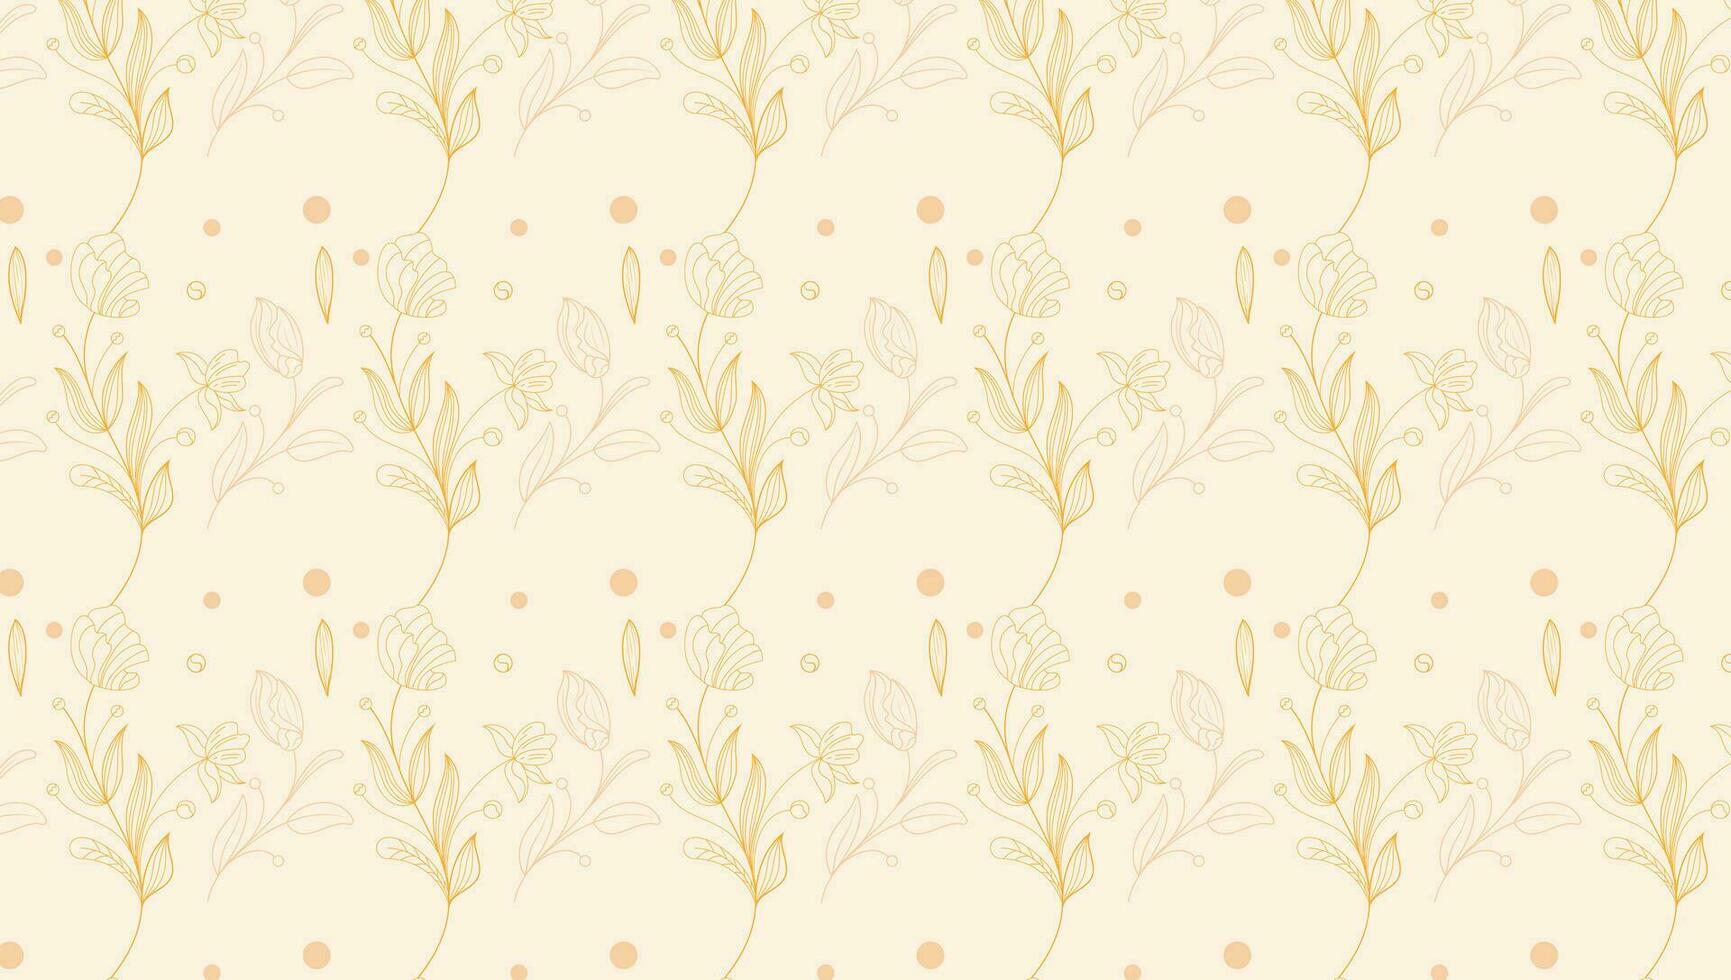 Ditsy pattern  floral seamless texture. Abstract background with simple small blue flowers, leaves. Liberty style wallpapers. Subtle ornament. Elegant repeat design for decor, fabric, print vector